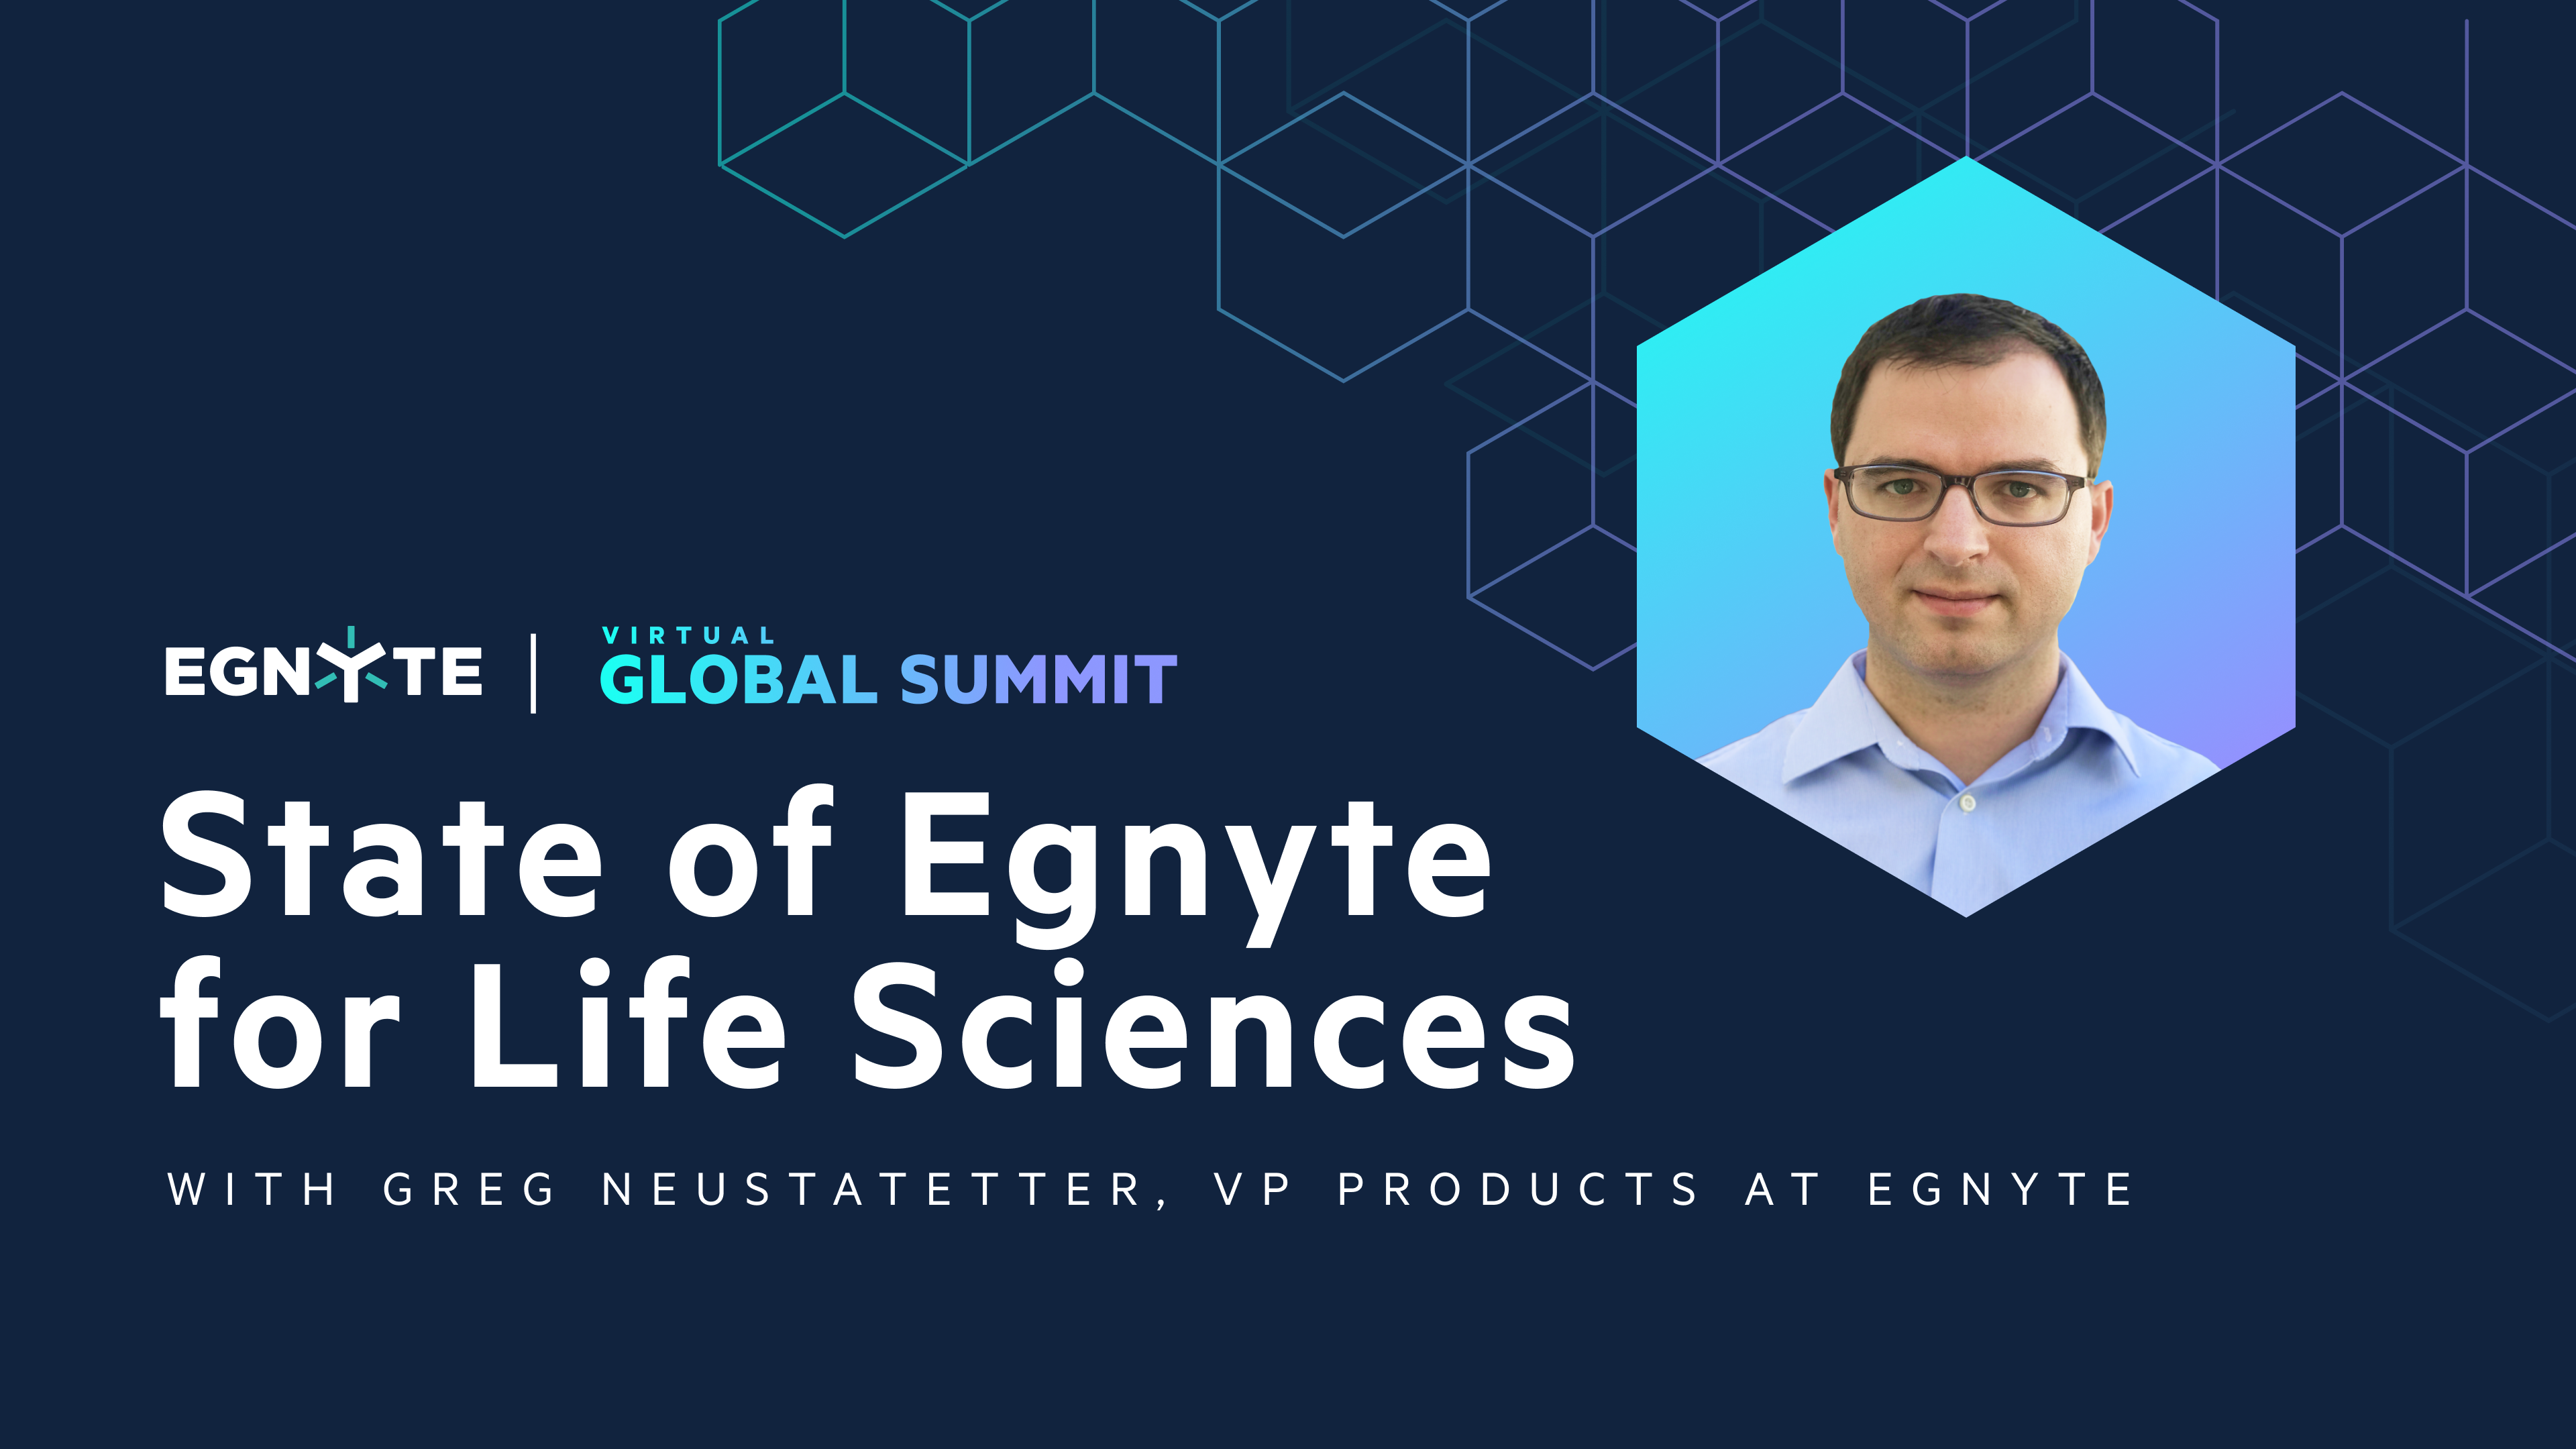 State of Egnyte for Life Sciences